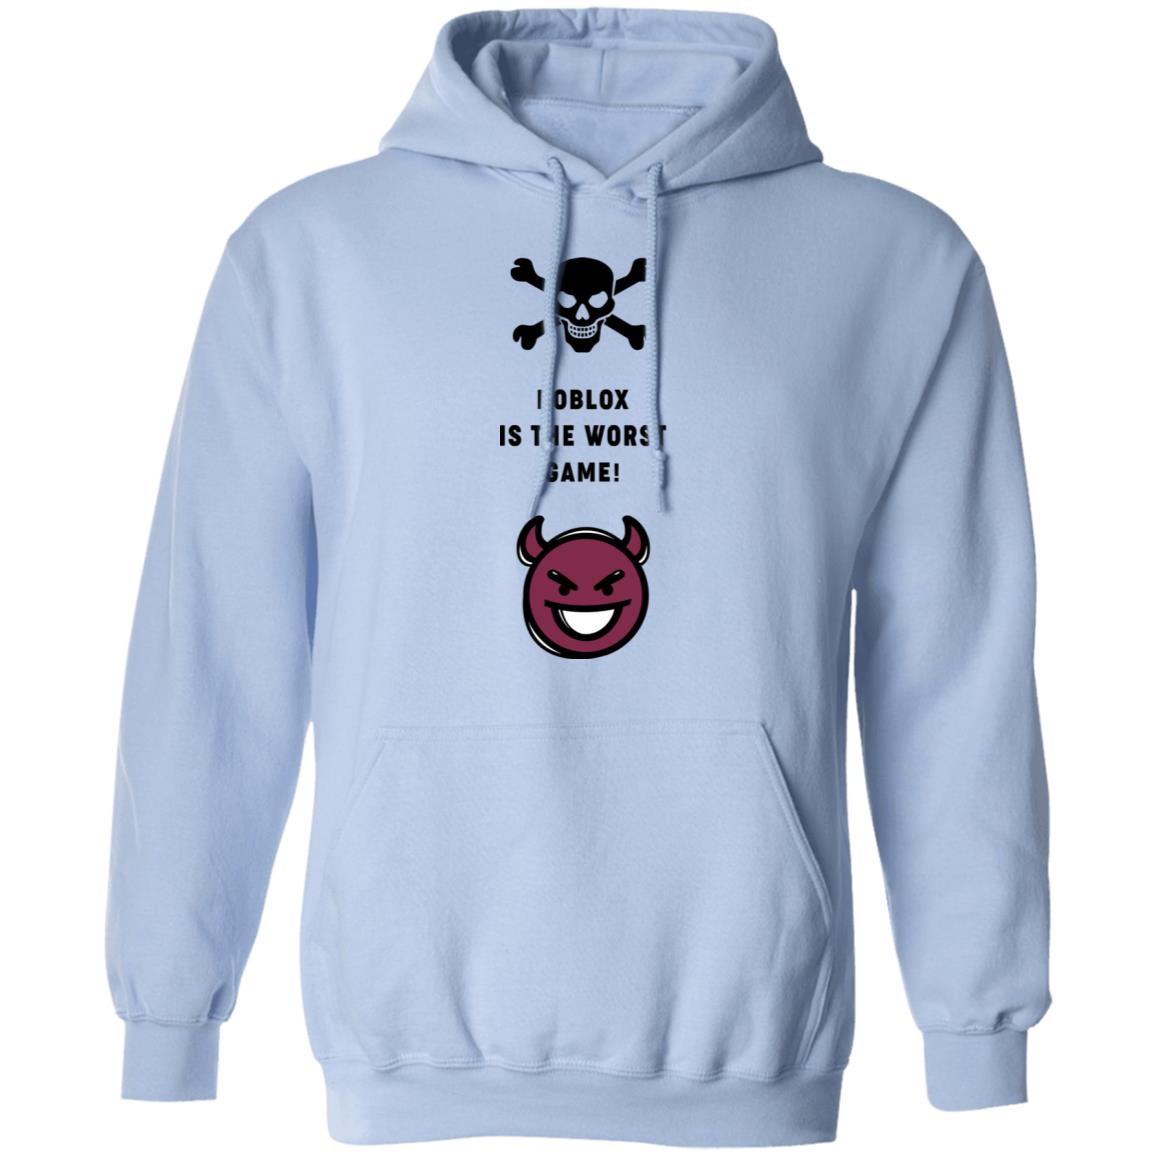 Roblox Is The Worst Game Funny Roblox T-Shirts, Hoodies, Long